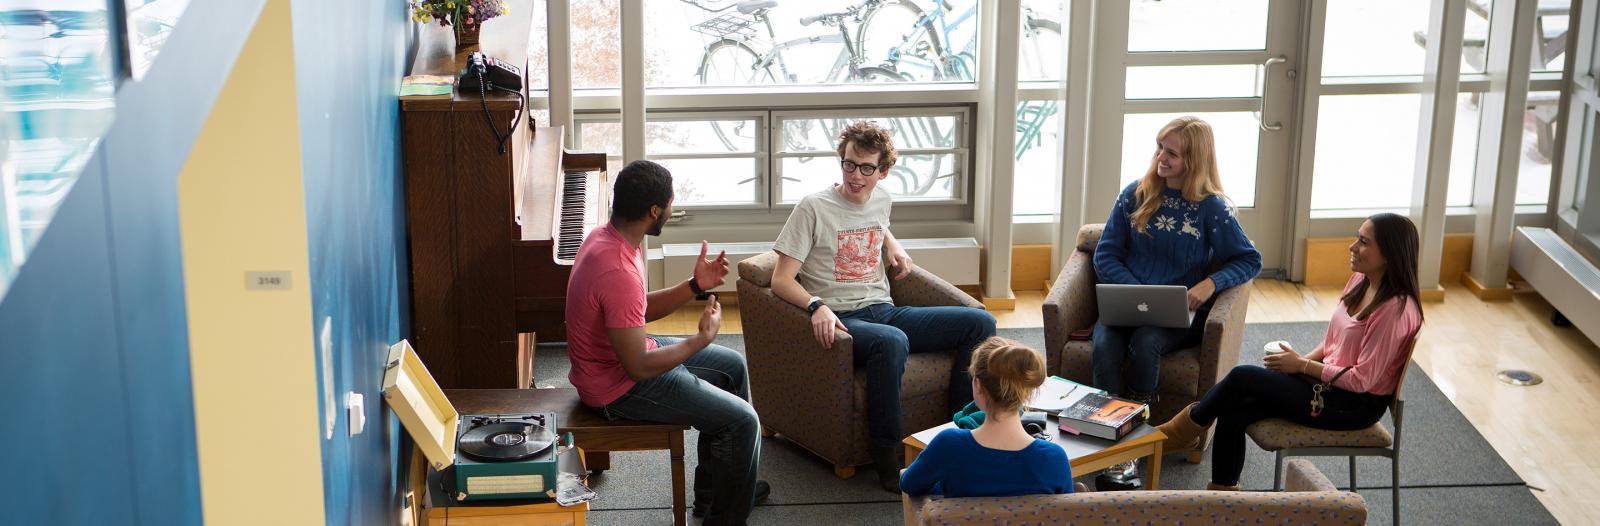 Students chat in dorm lobby